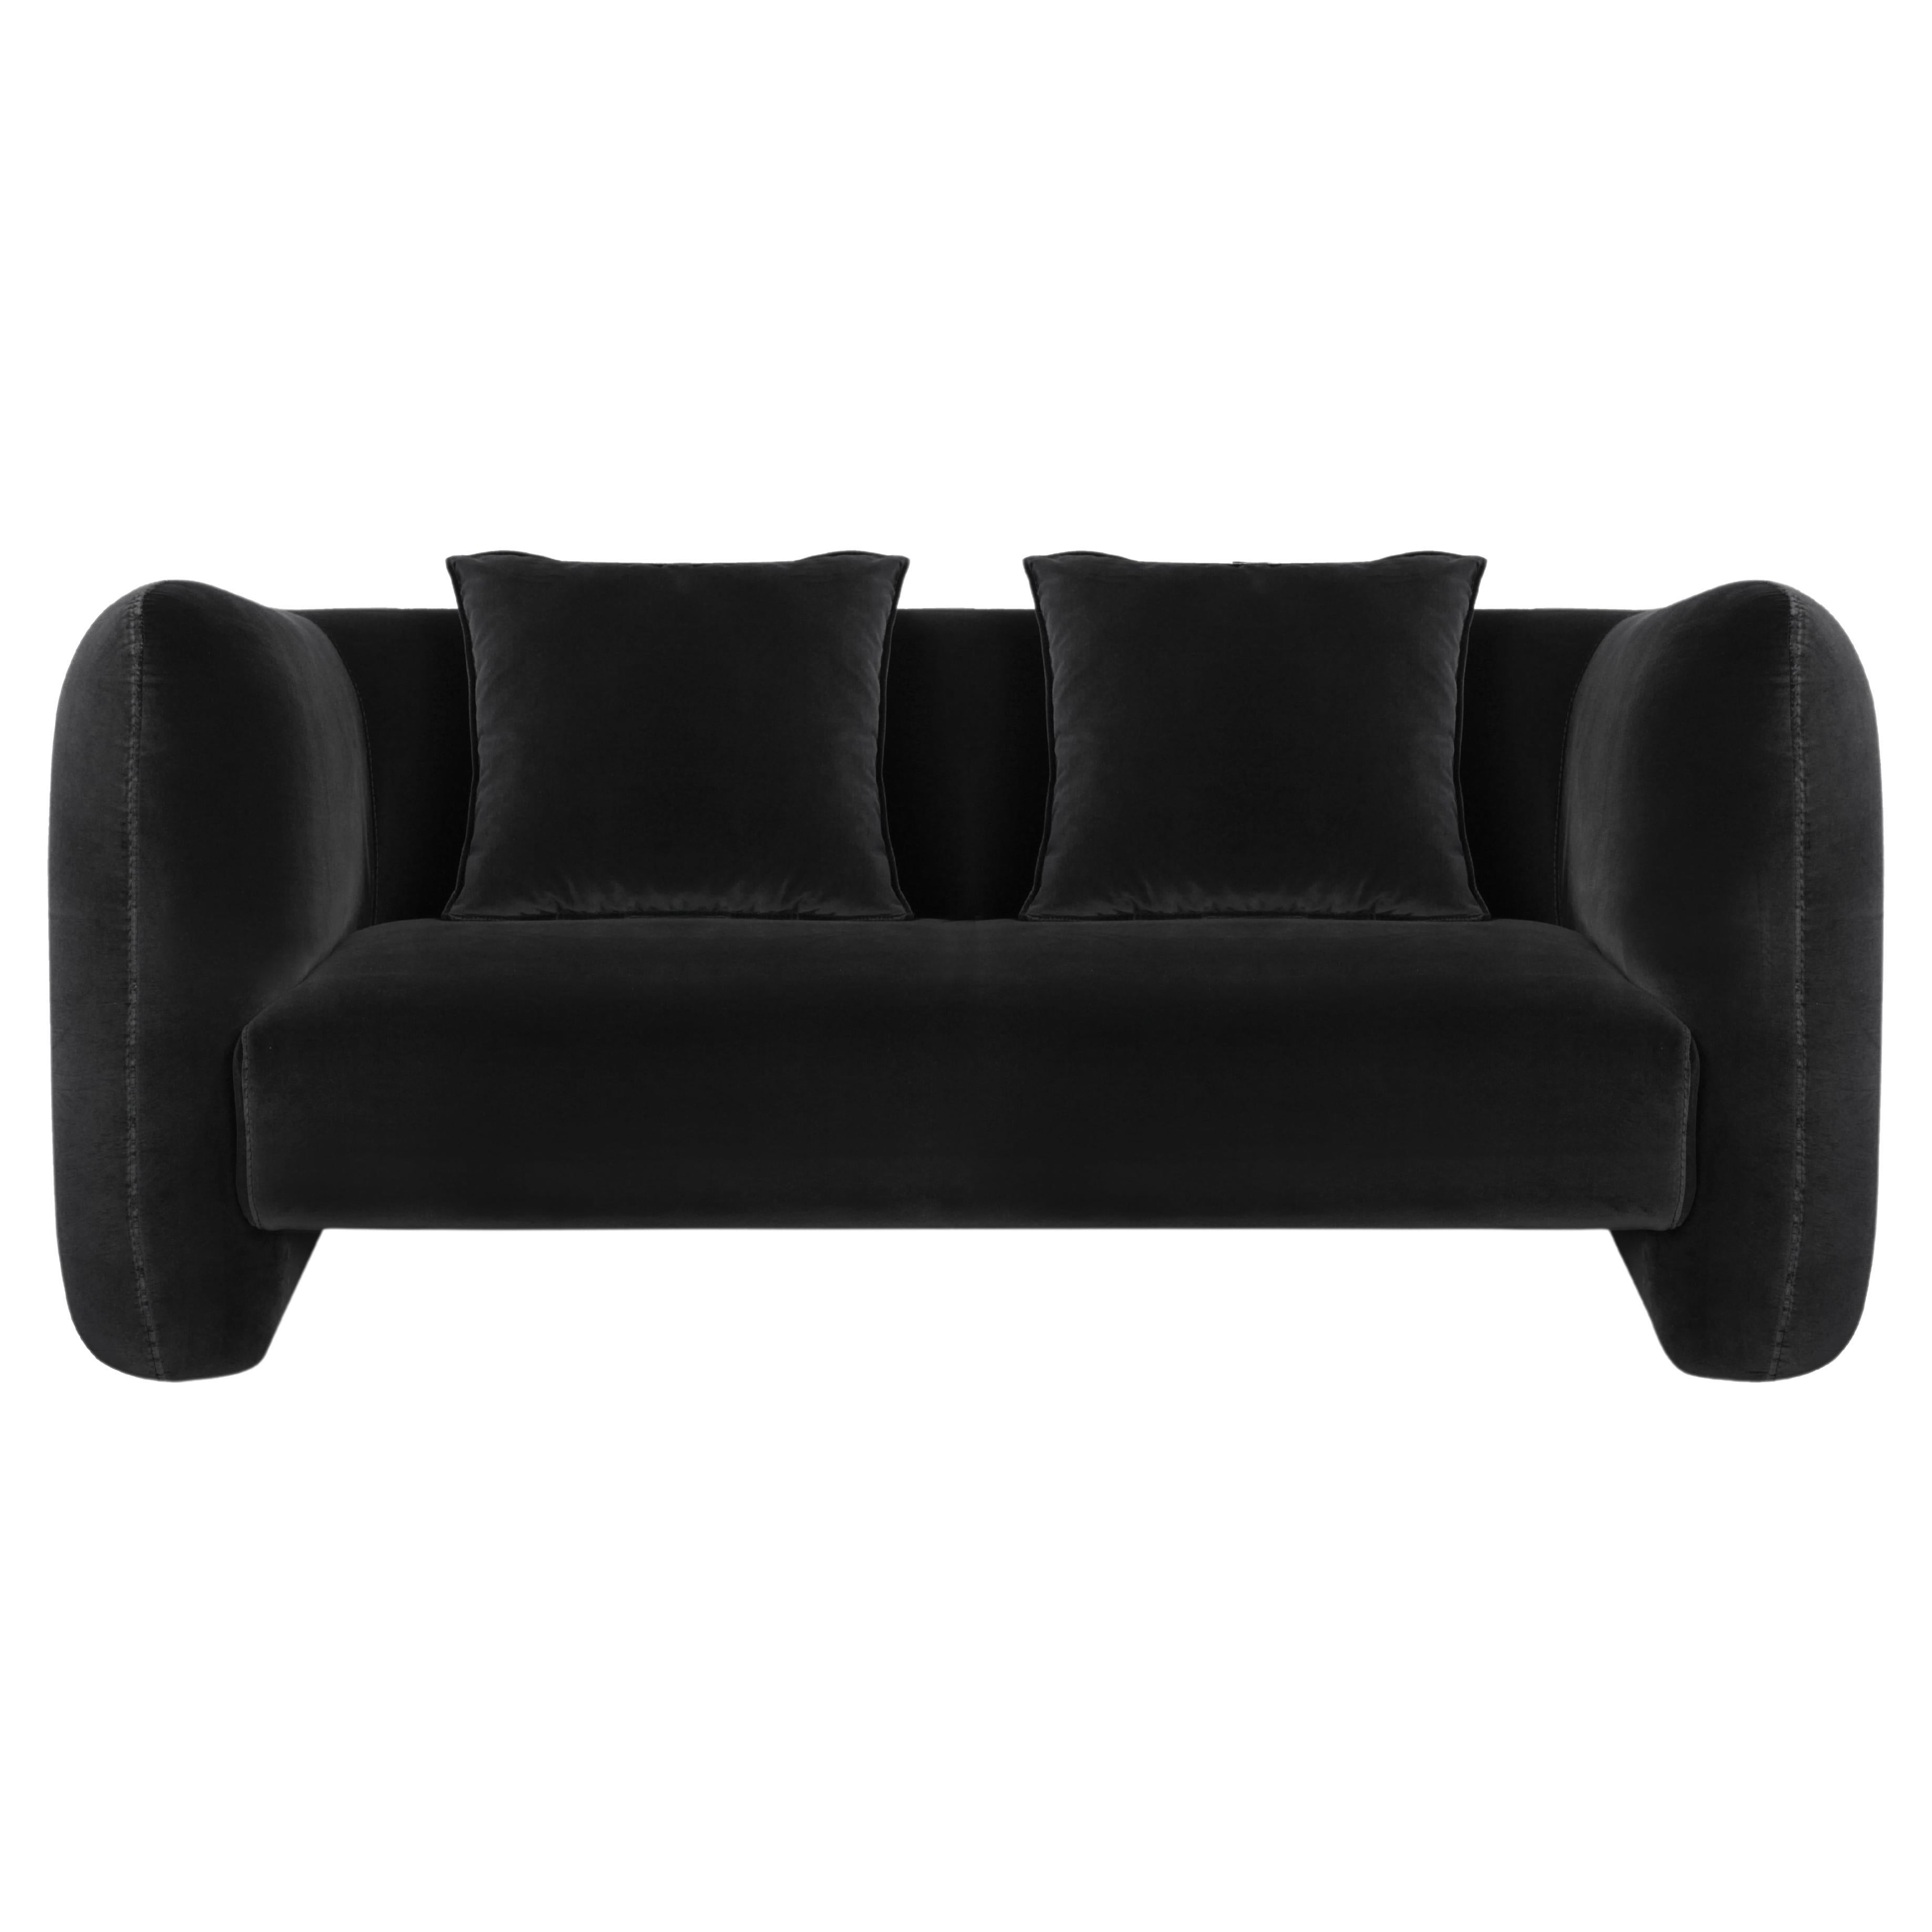 Contemporary Modern Jacob Sofa in Black Velvet Fabric by Collector Studio